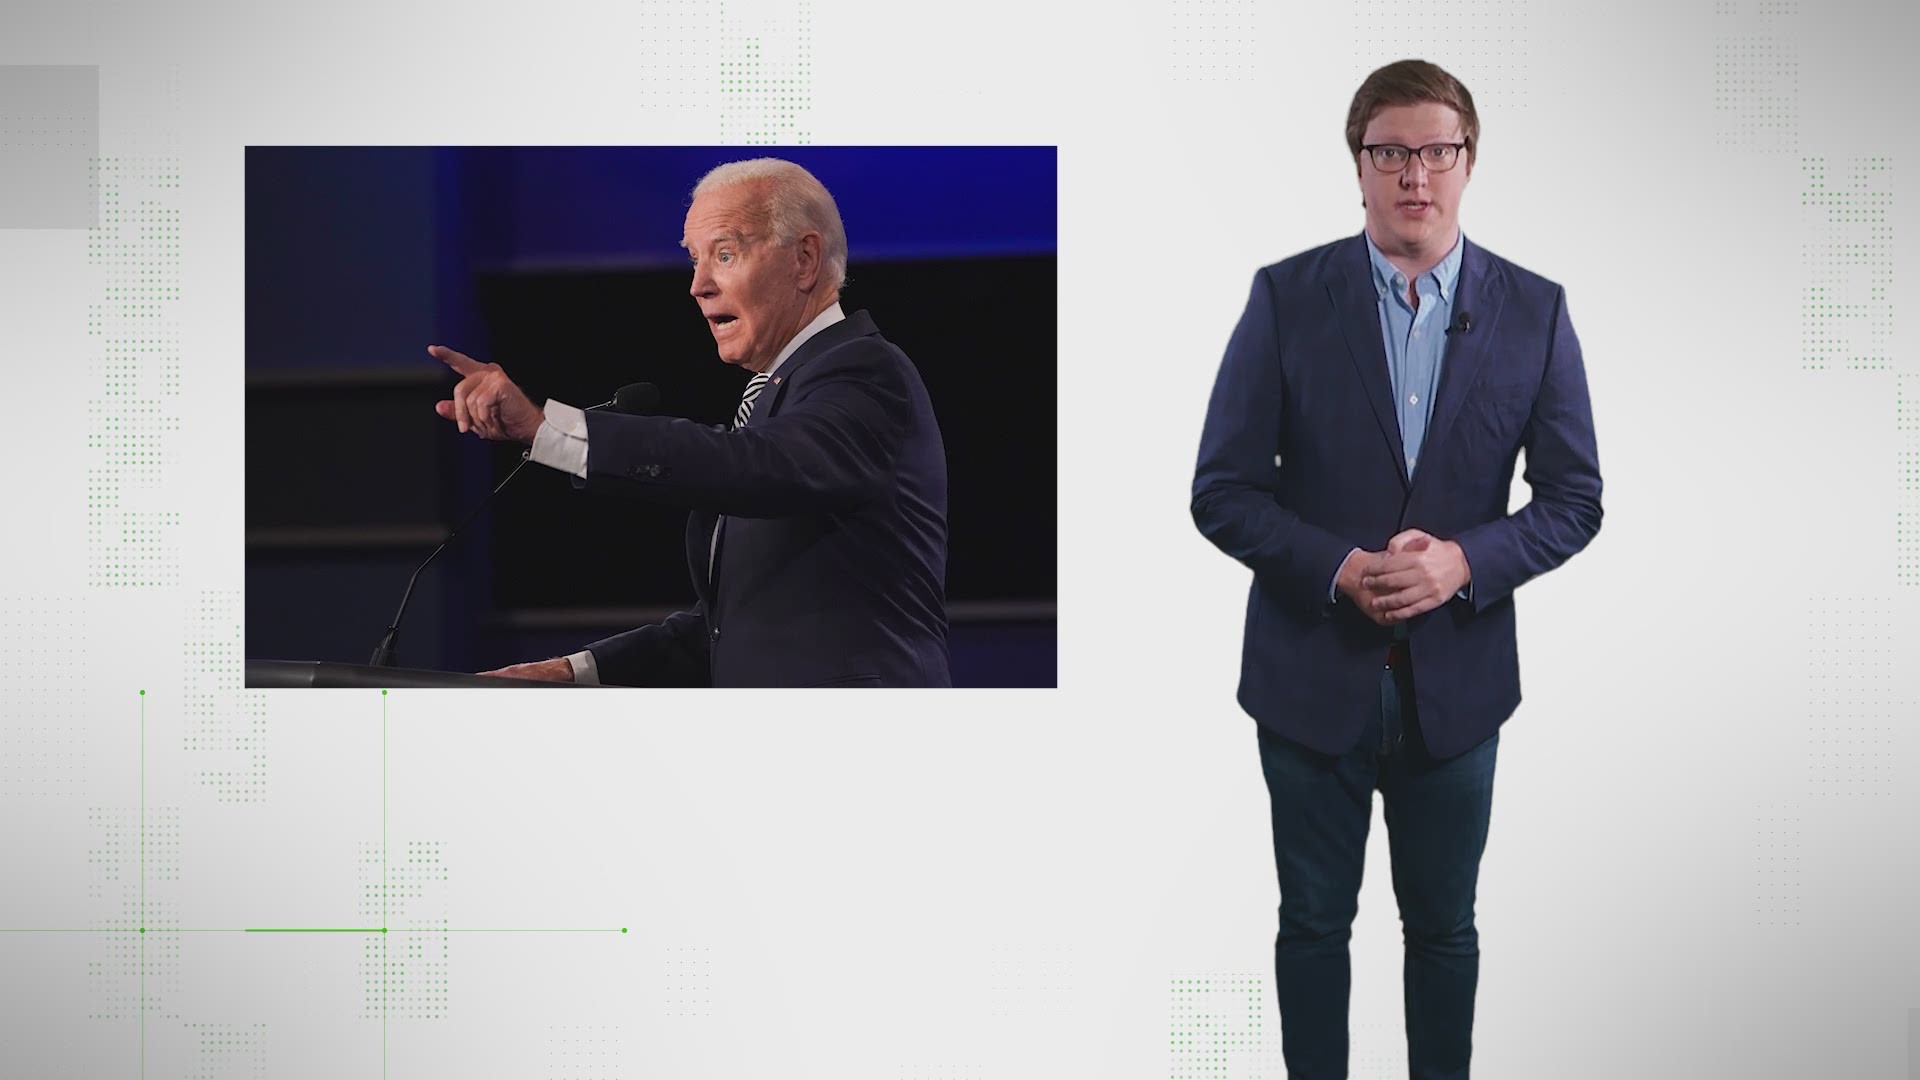 The VERIFY team breaks down one of the exchanges between Trump and Biden during the first presidential debate.